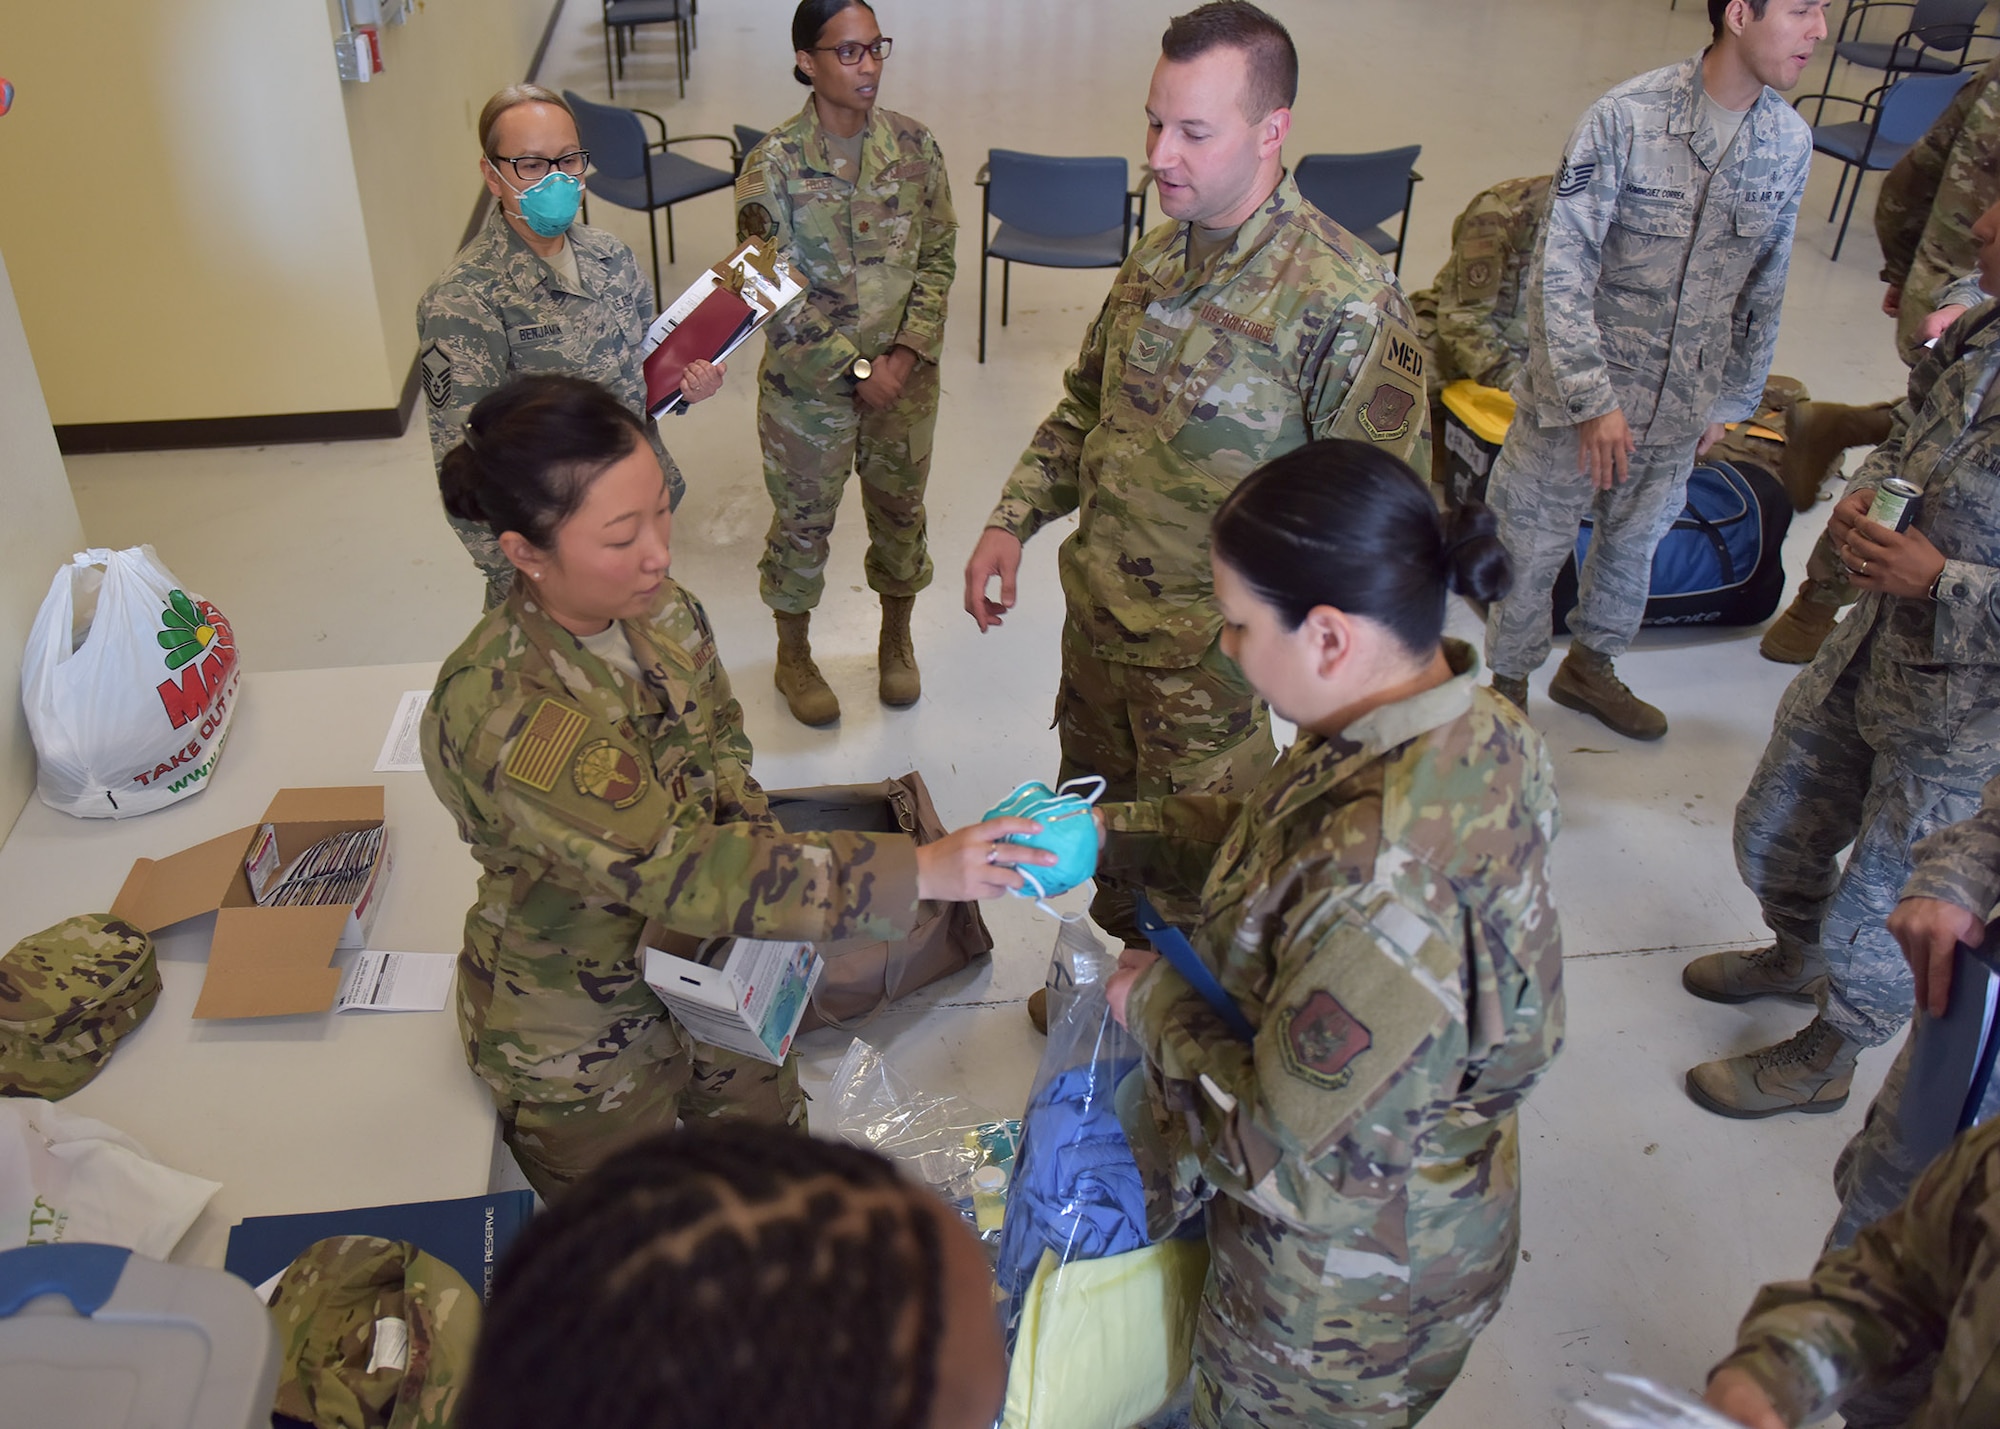 944th Medical and Aeromedical Staging Squadron Reserve Citizen Airmen receive Personal Protective Equipment April 22 as they prepare for deployment at Luke Air Force Base, Ariz. Over a dozen 944th Fighter Wing medics were tasked to aid in Coronavirus response in and around New York City. (U.S. Air Force photo by Tech. Sgt. Louis Vega Jr.)